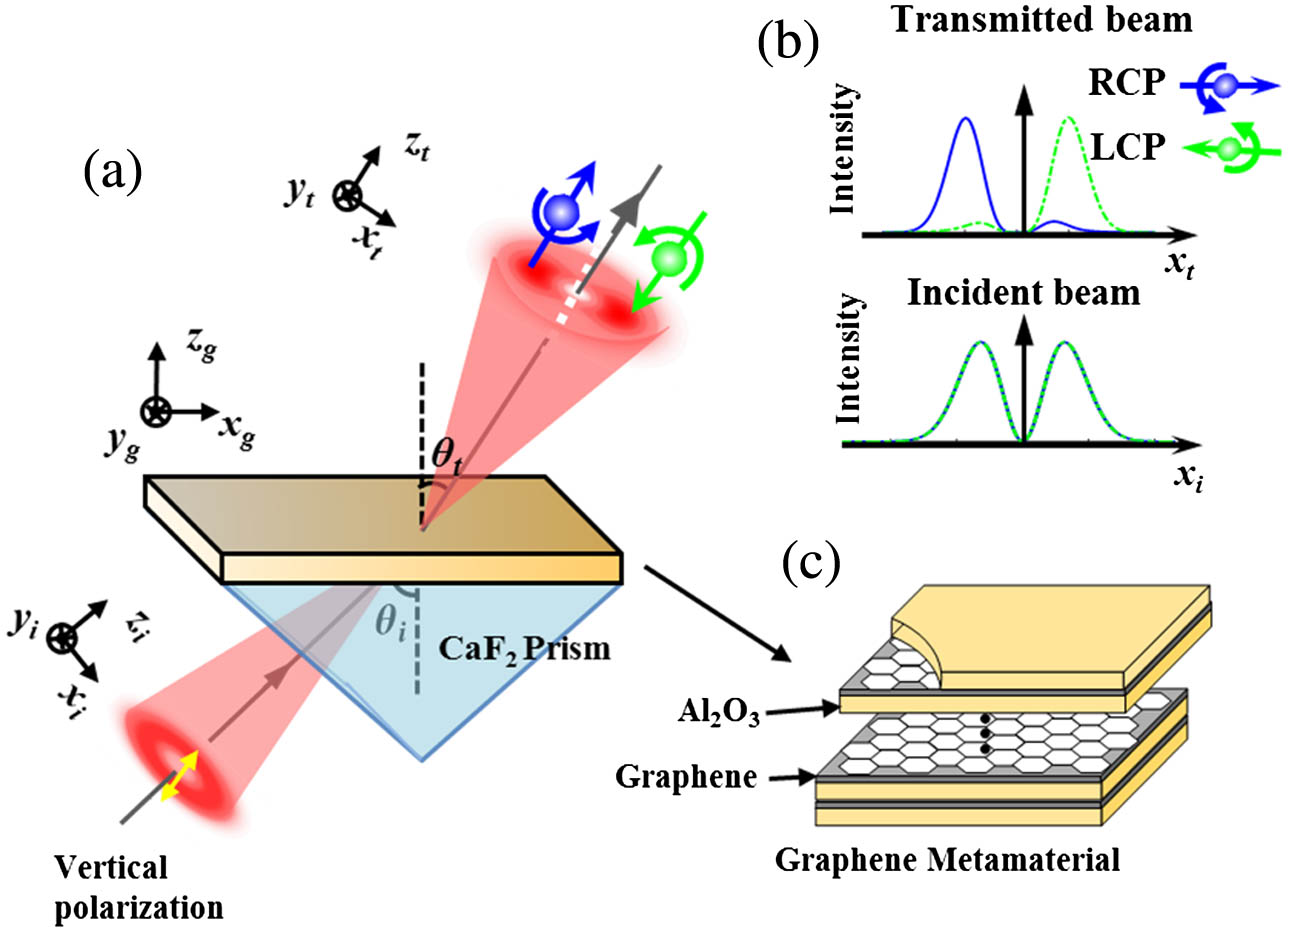 (a) Schematic of the OAM-dependent spin splitting. A vertically polarized LG beam is coupled into a graphene metamaterial slab through a CaF2 prism. The two opposite spin components of the transmitted beam will separate along the xt axis. (b) The intensity distributions of the RCP and LCP components of the incident and transmitted beams along the xi and xt axes, respectively. (c) The graphene metamaterial composed of alternating graphene sheets and Al2O3 layers.